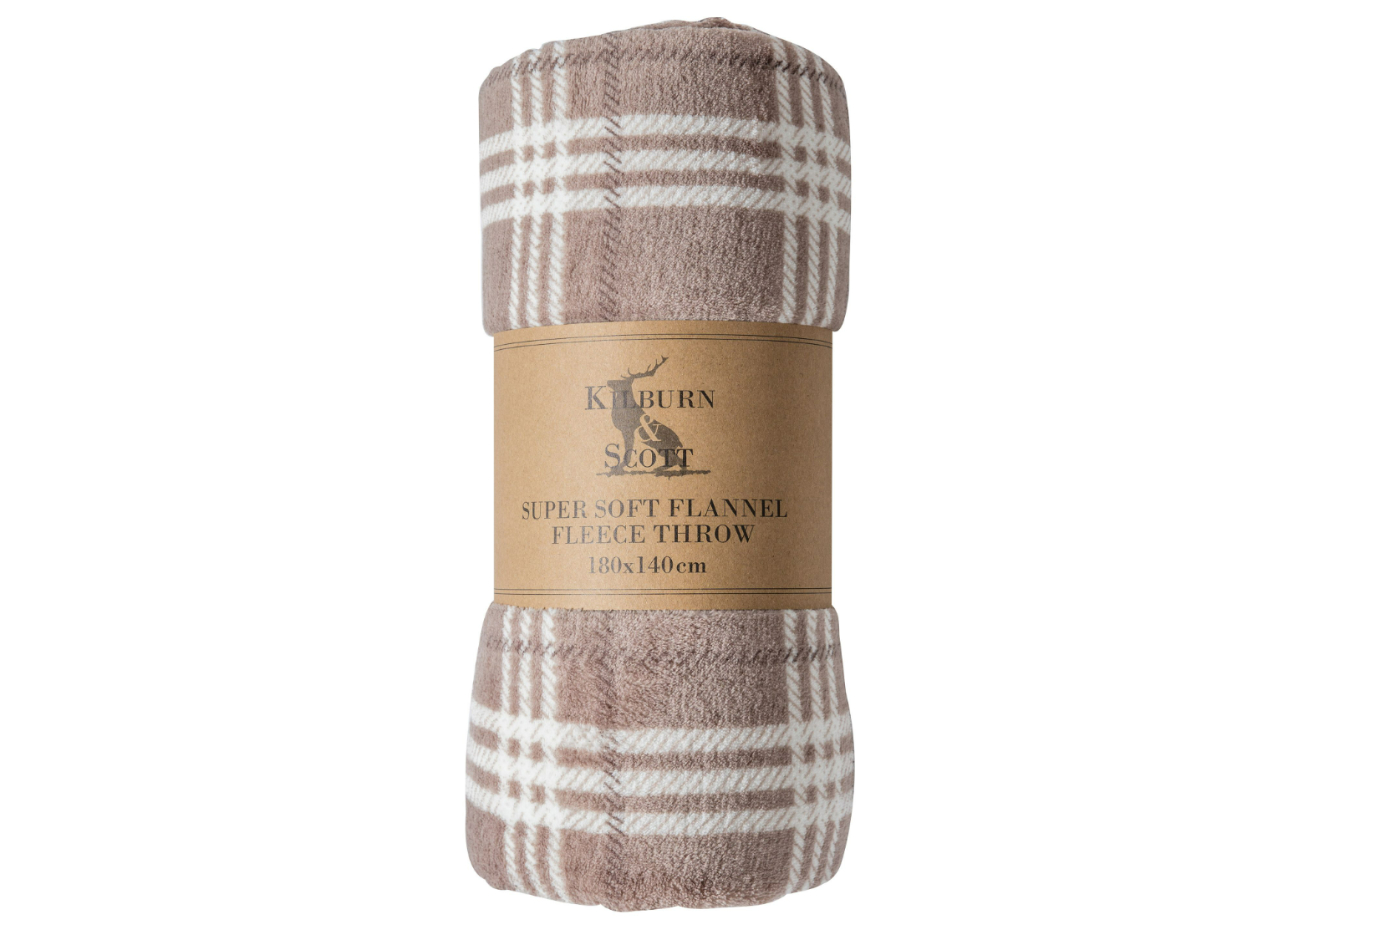 View Taupe Checkmate Rolled Flannel Fleece Throw 1400 x 1800mm information